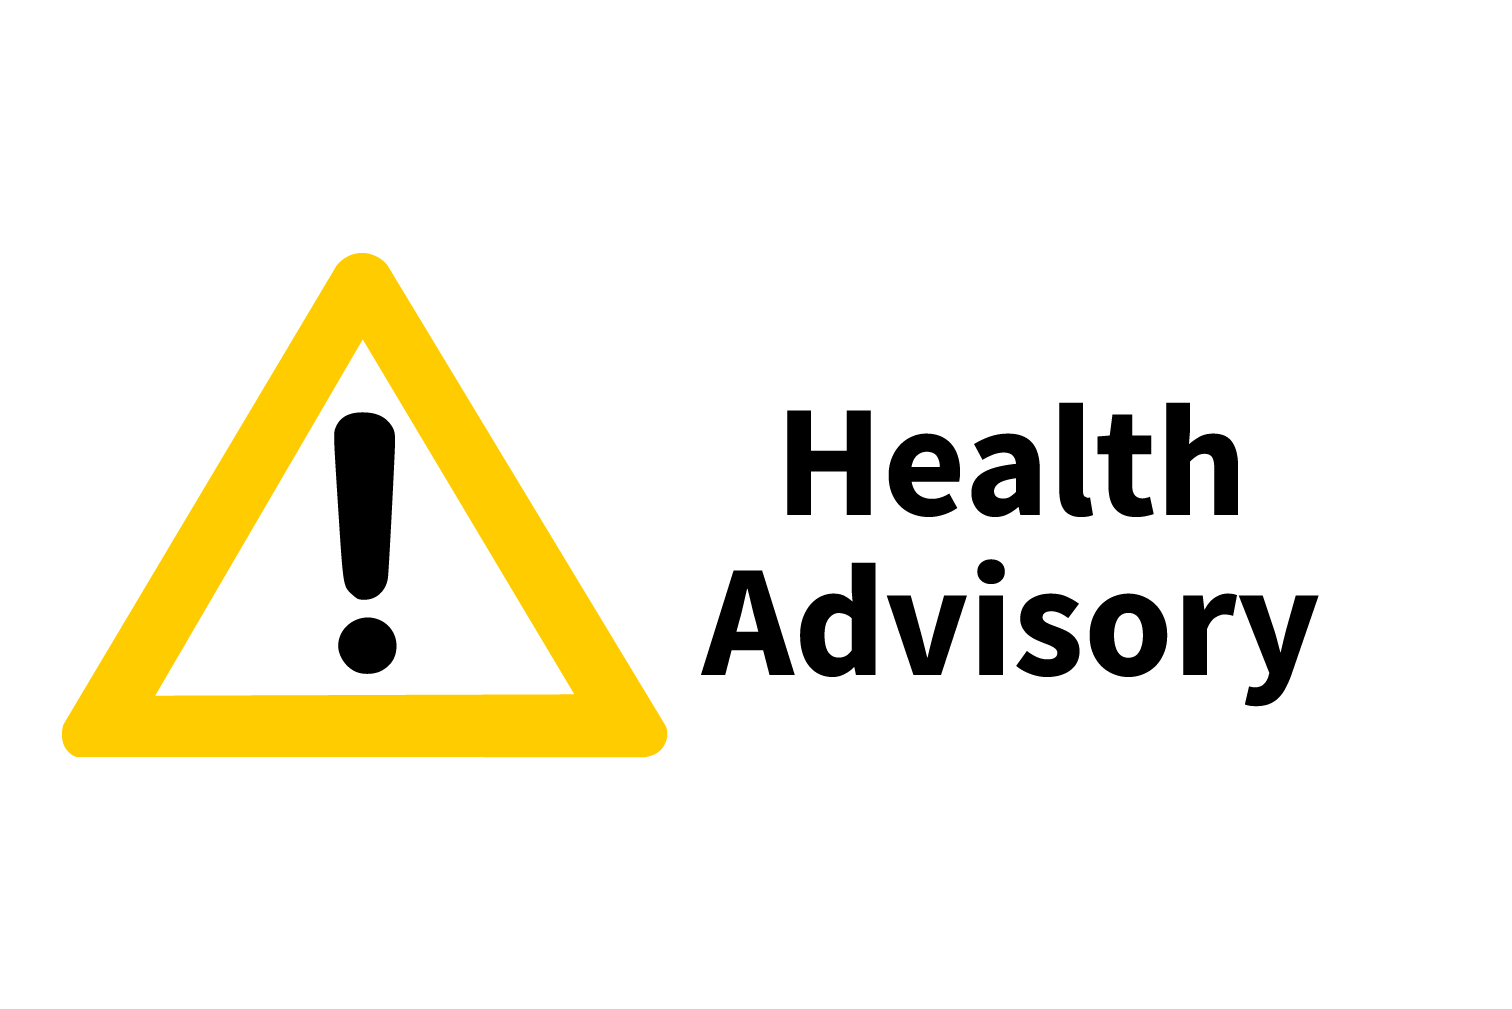 10/06/22 Health Advisory: Severe cases of monkeypox among people with immune compromise